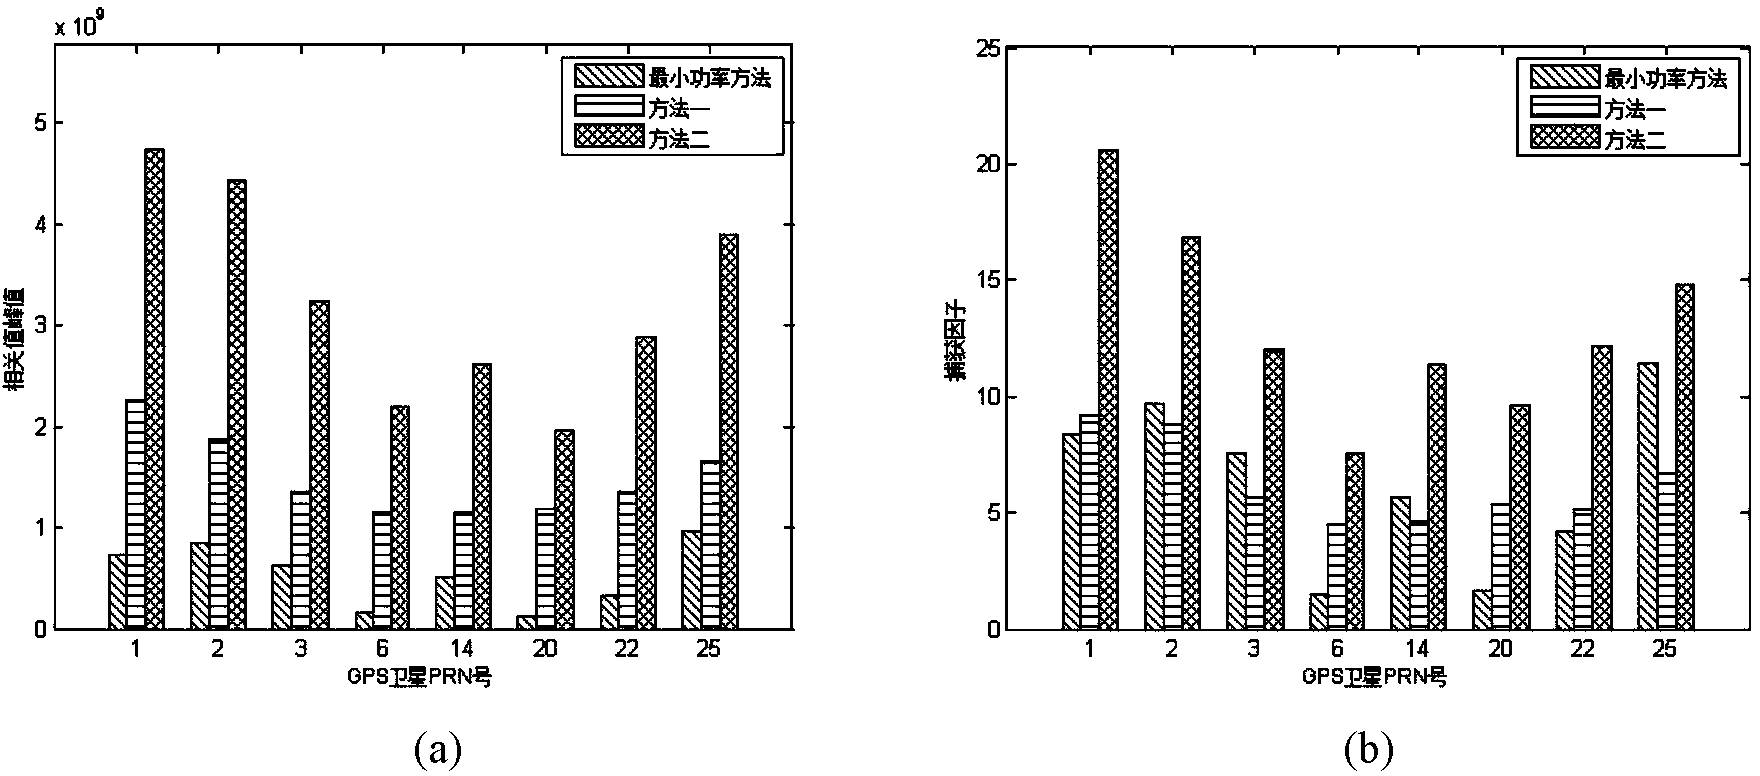 Method for suppressing non-stationary blanket interference signal in satellite navigation system